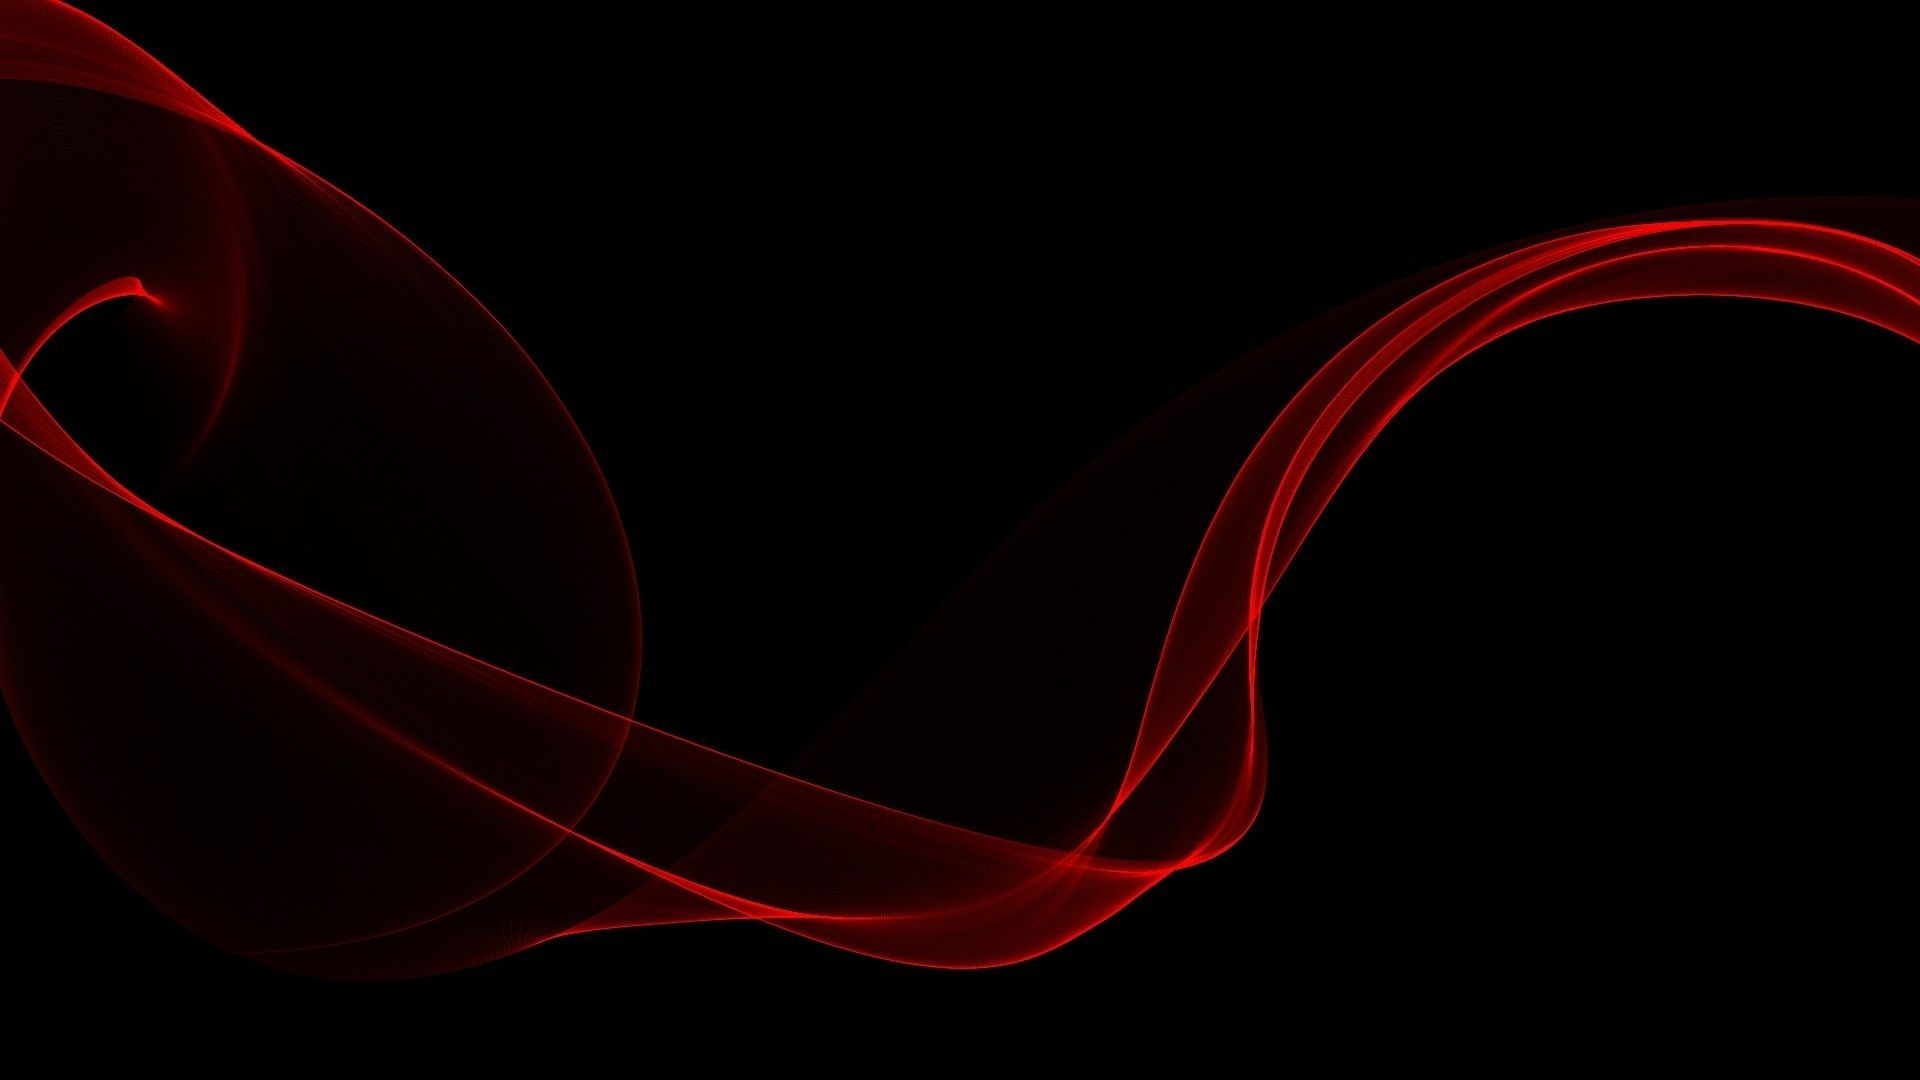 10 New 1920X1080 Red And Black Wallpaper FULL HD 1080p For ...